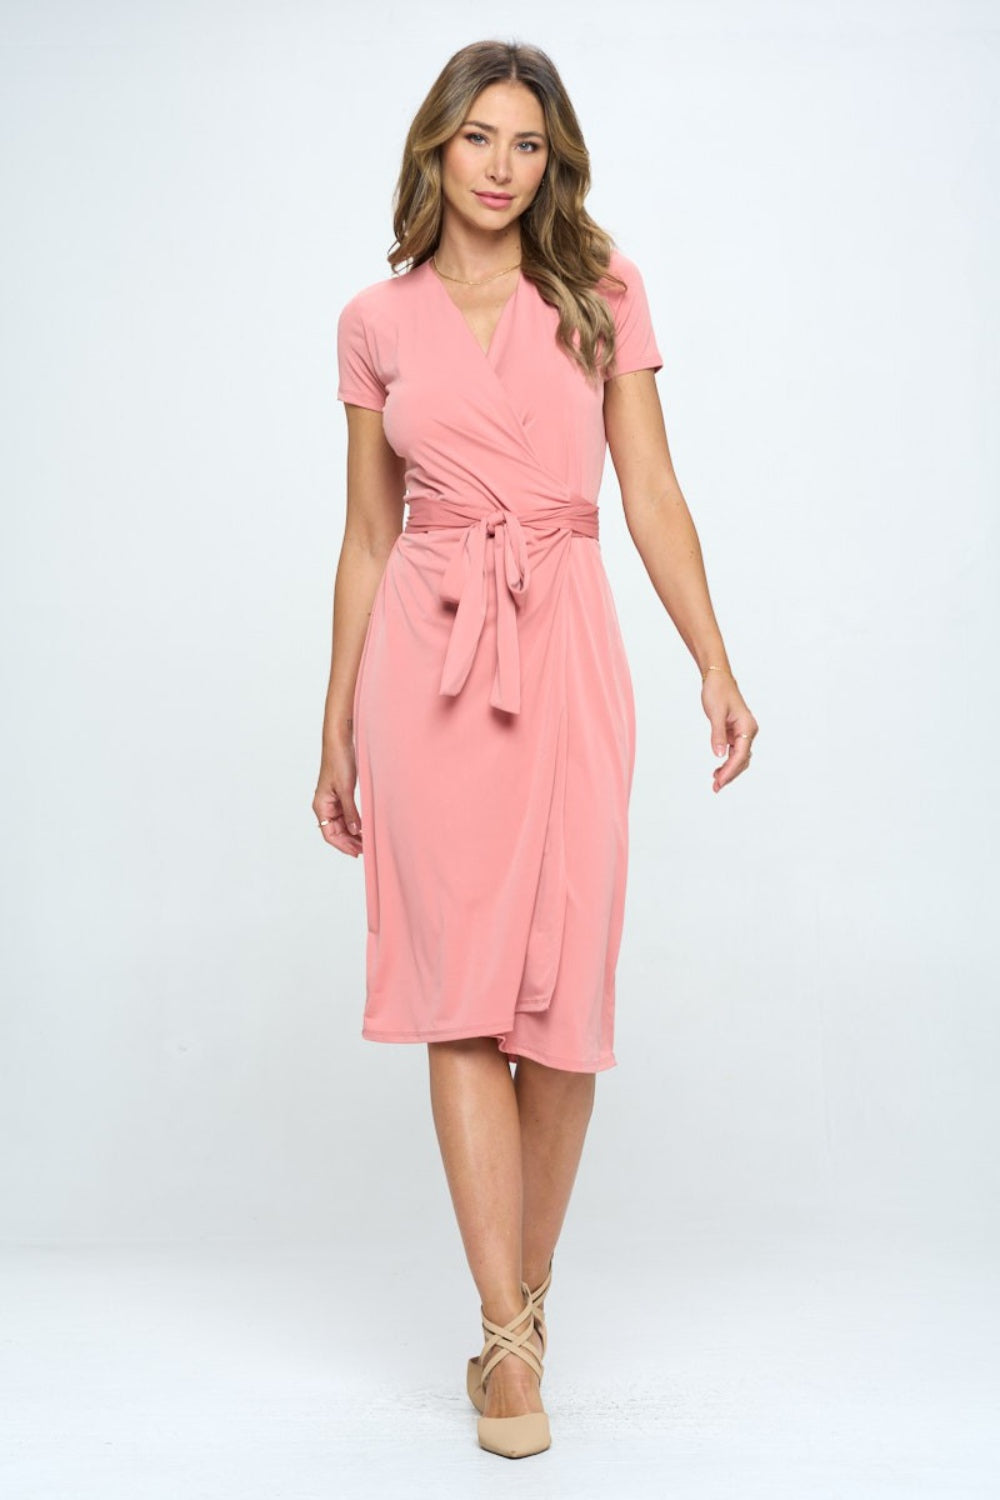 This tie front surplice short sleeve dress is a fabulous addition to your summer wardrobe. The surplice neckline creates a flattering silhouette while adding a touch of sophistication. The tie front detail at the waist adds a stylish and trendy element to the dress. S - L